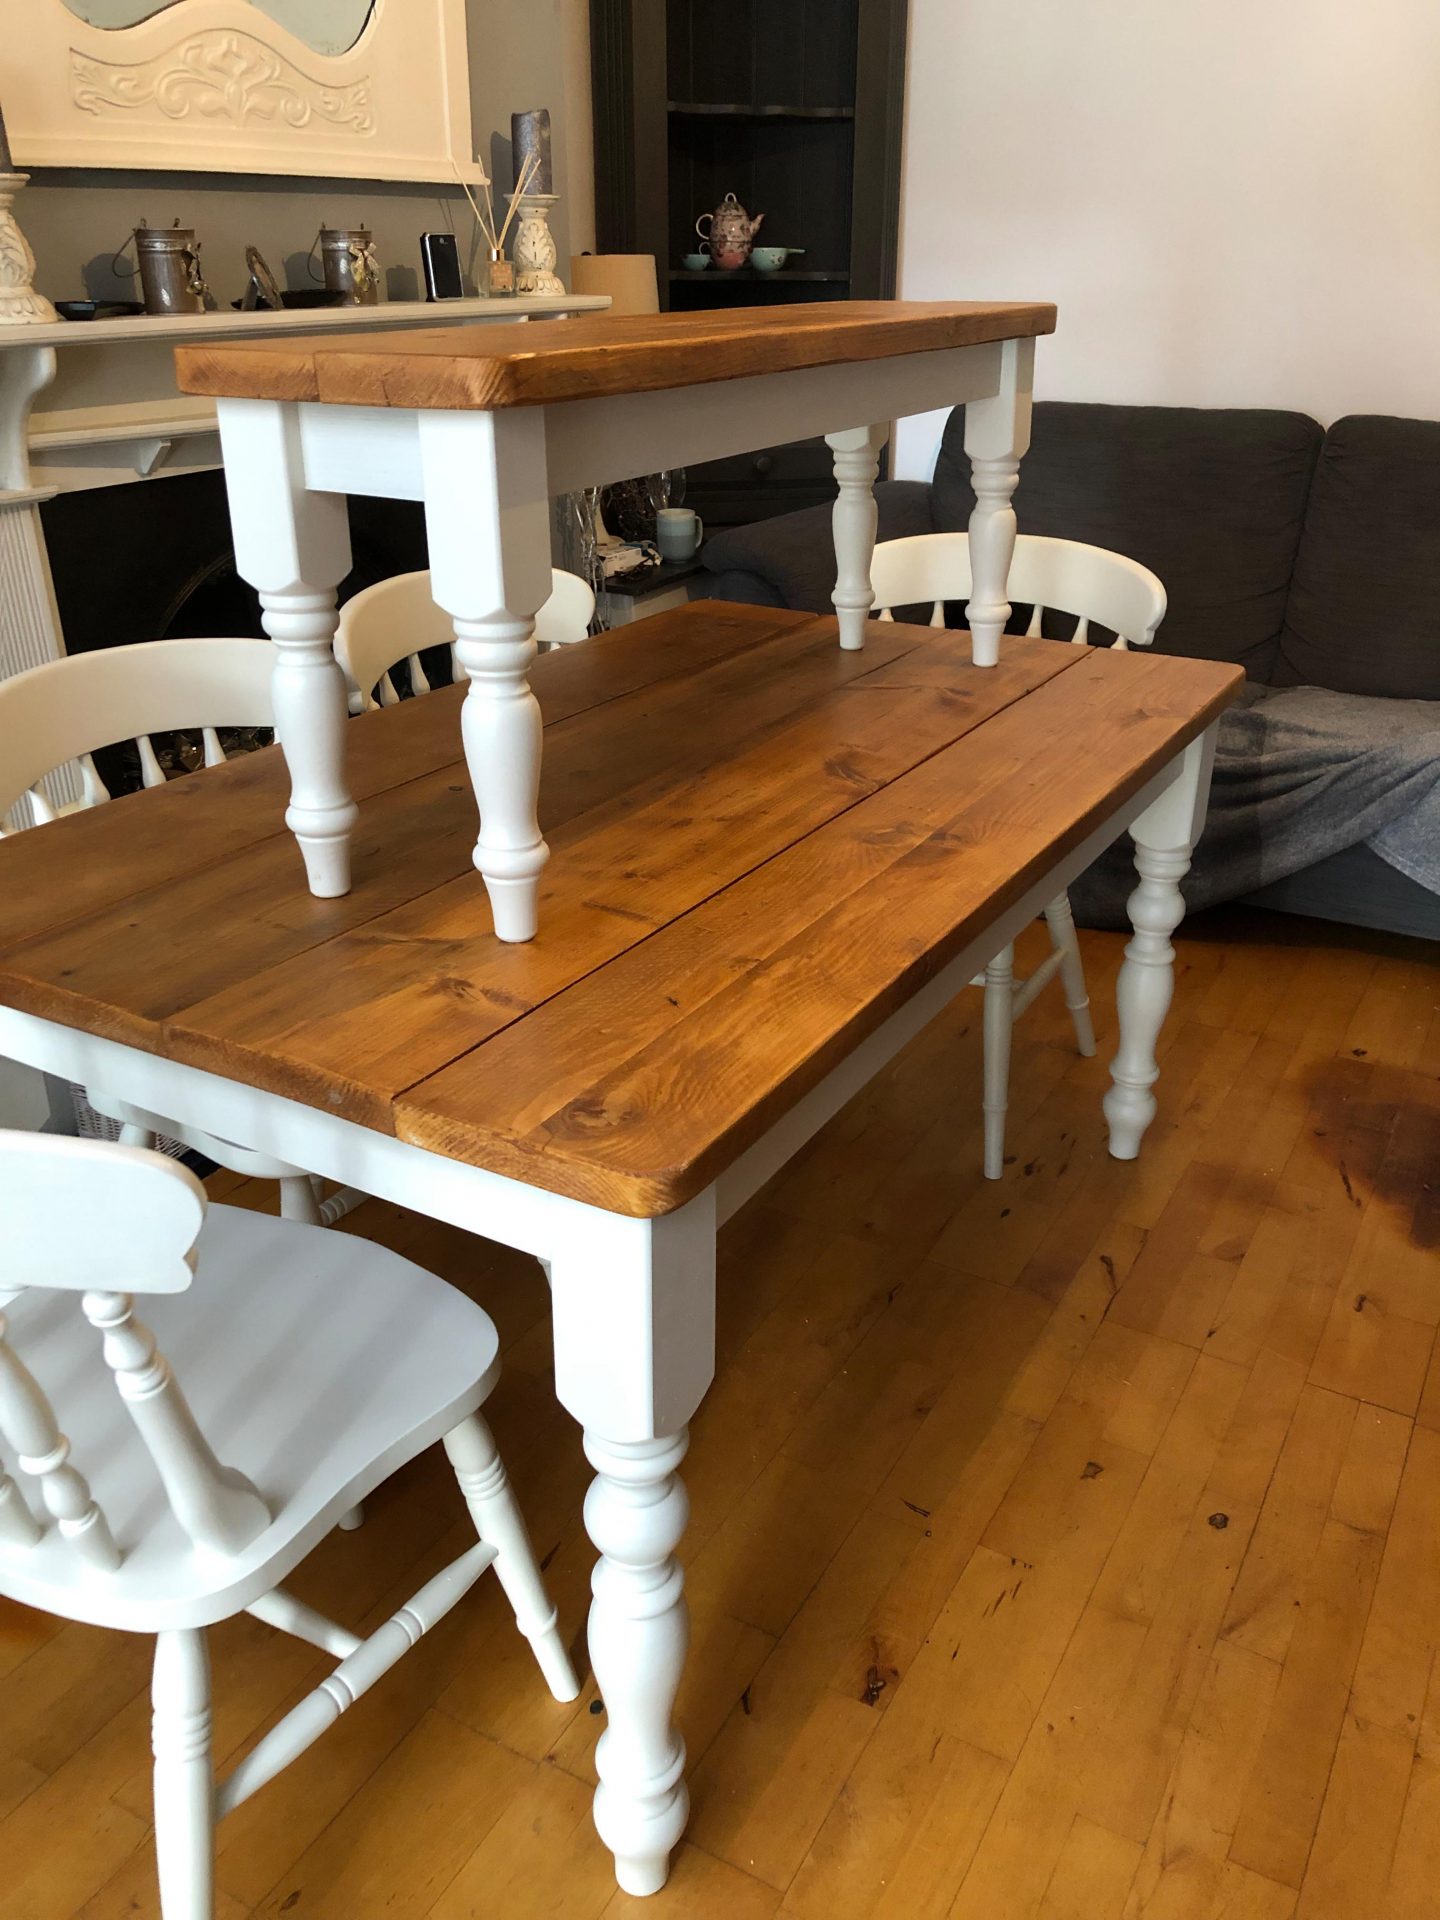 Dining room table with white painted legs and reclaimed wood table top